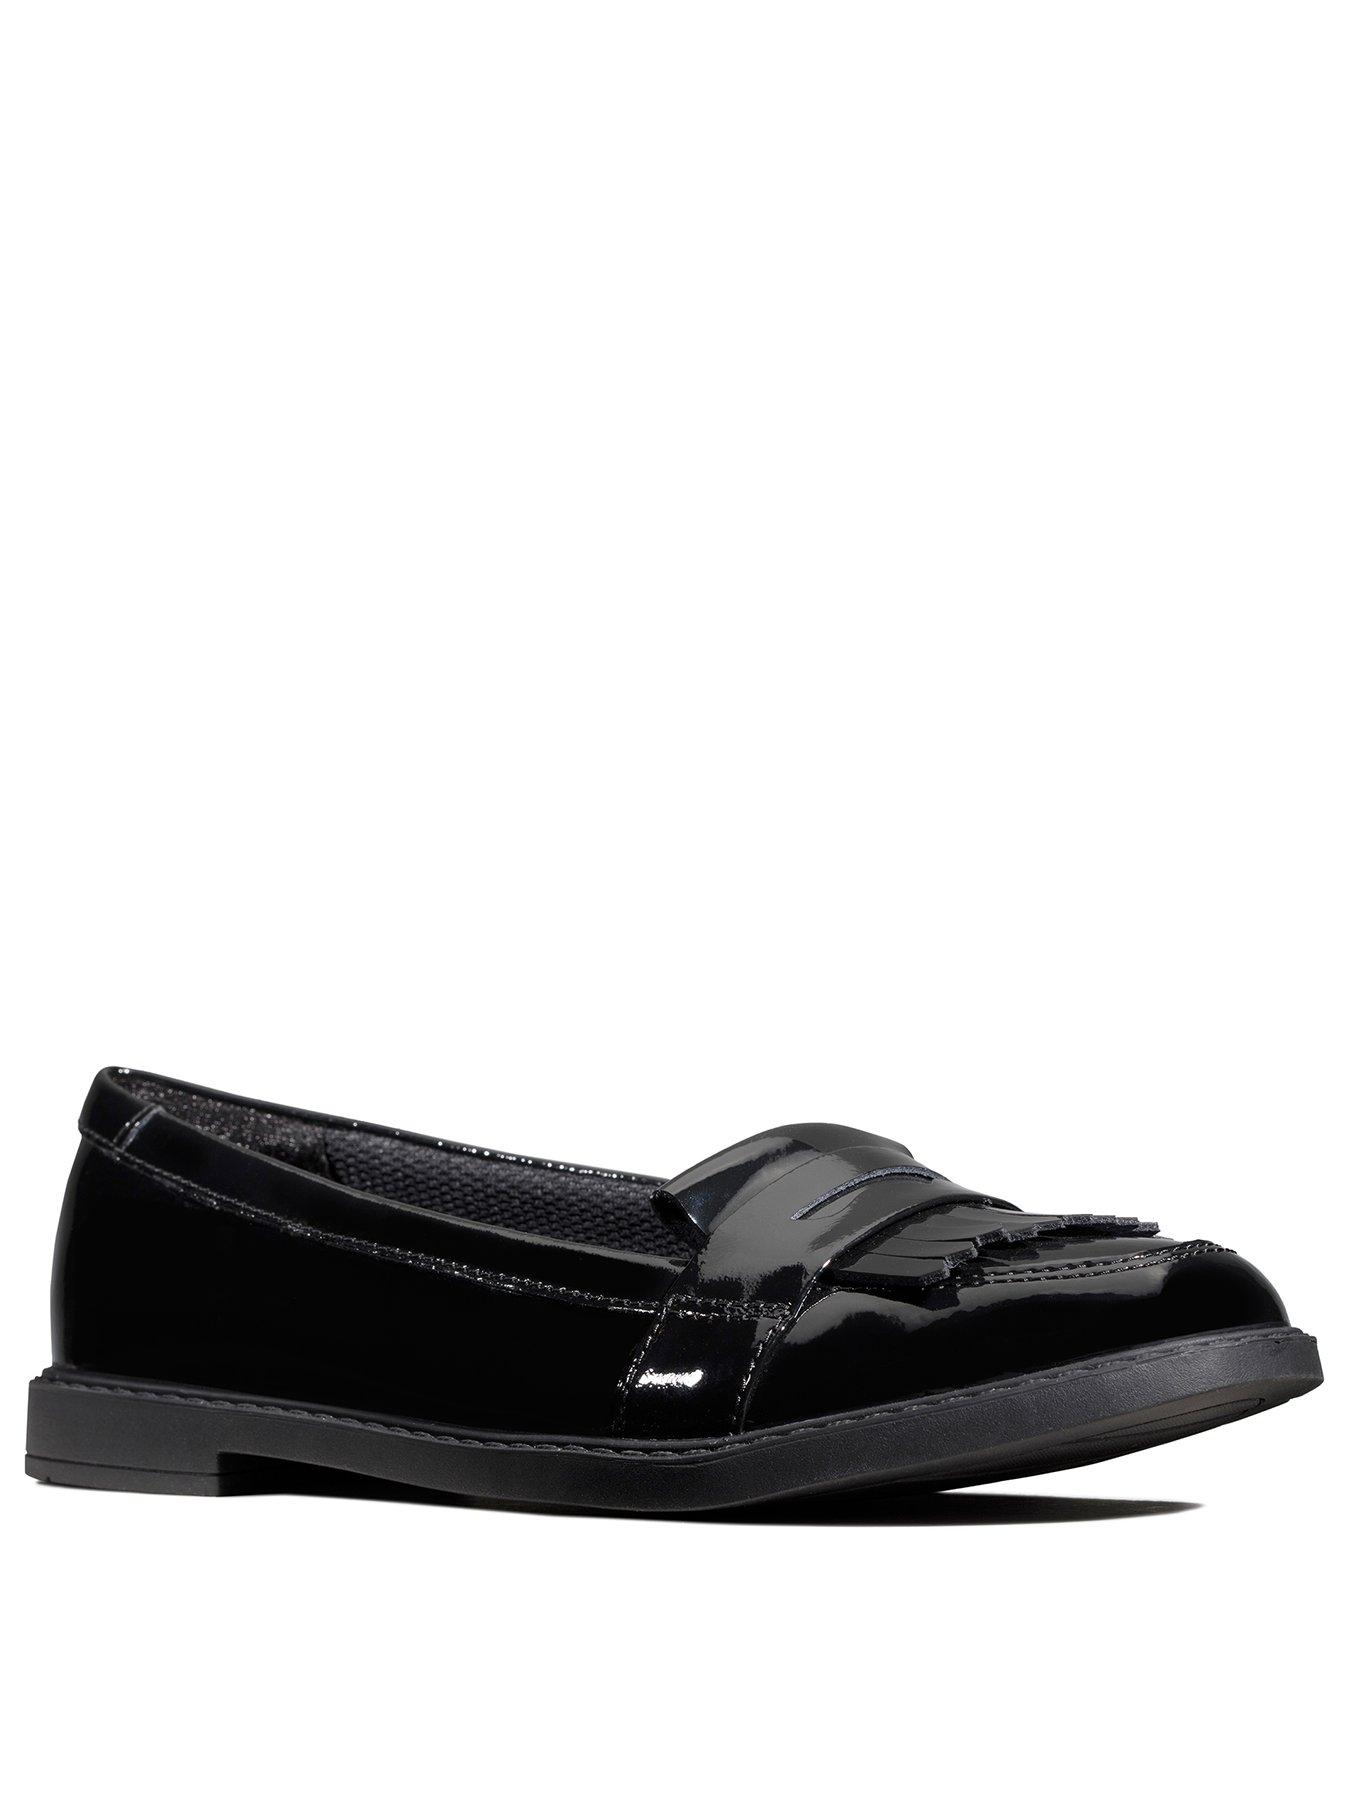 Clarks Girls Scala Bright Loafers - Black | very.co.uk